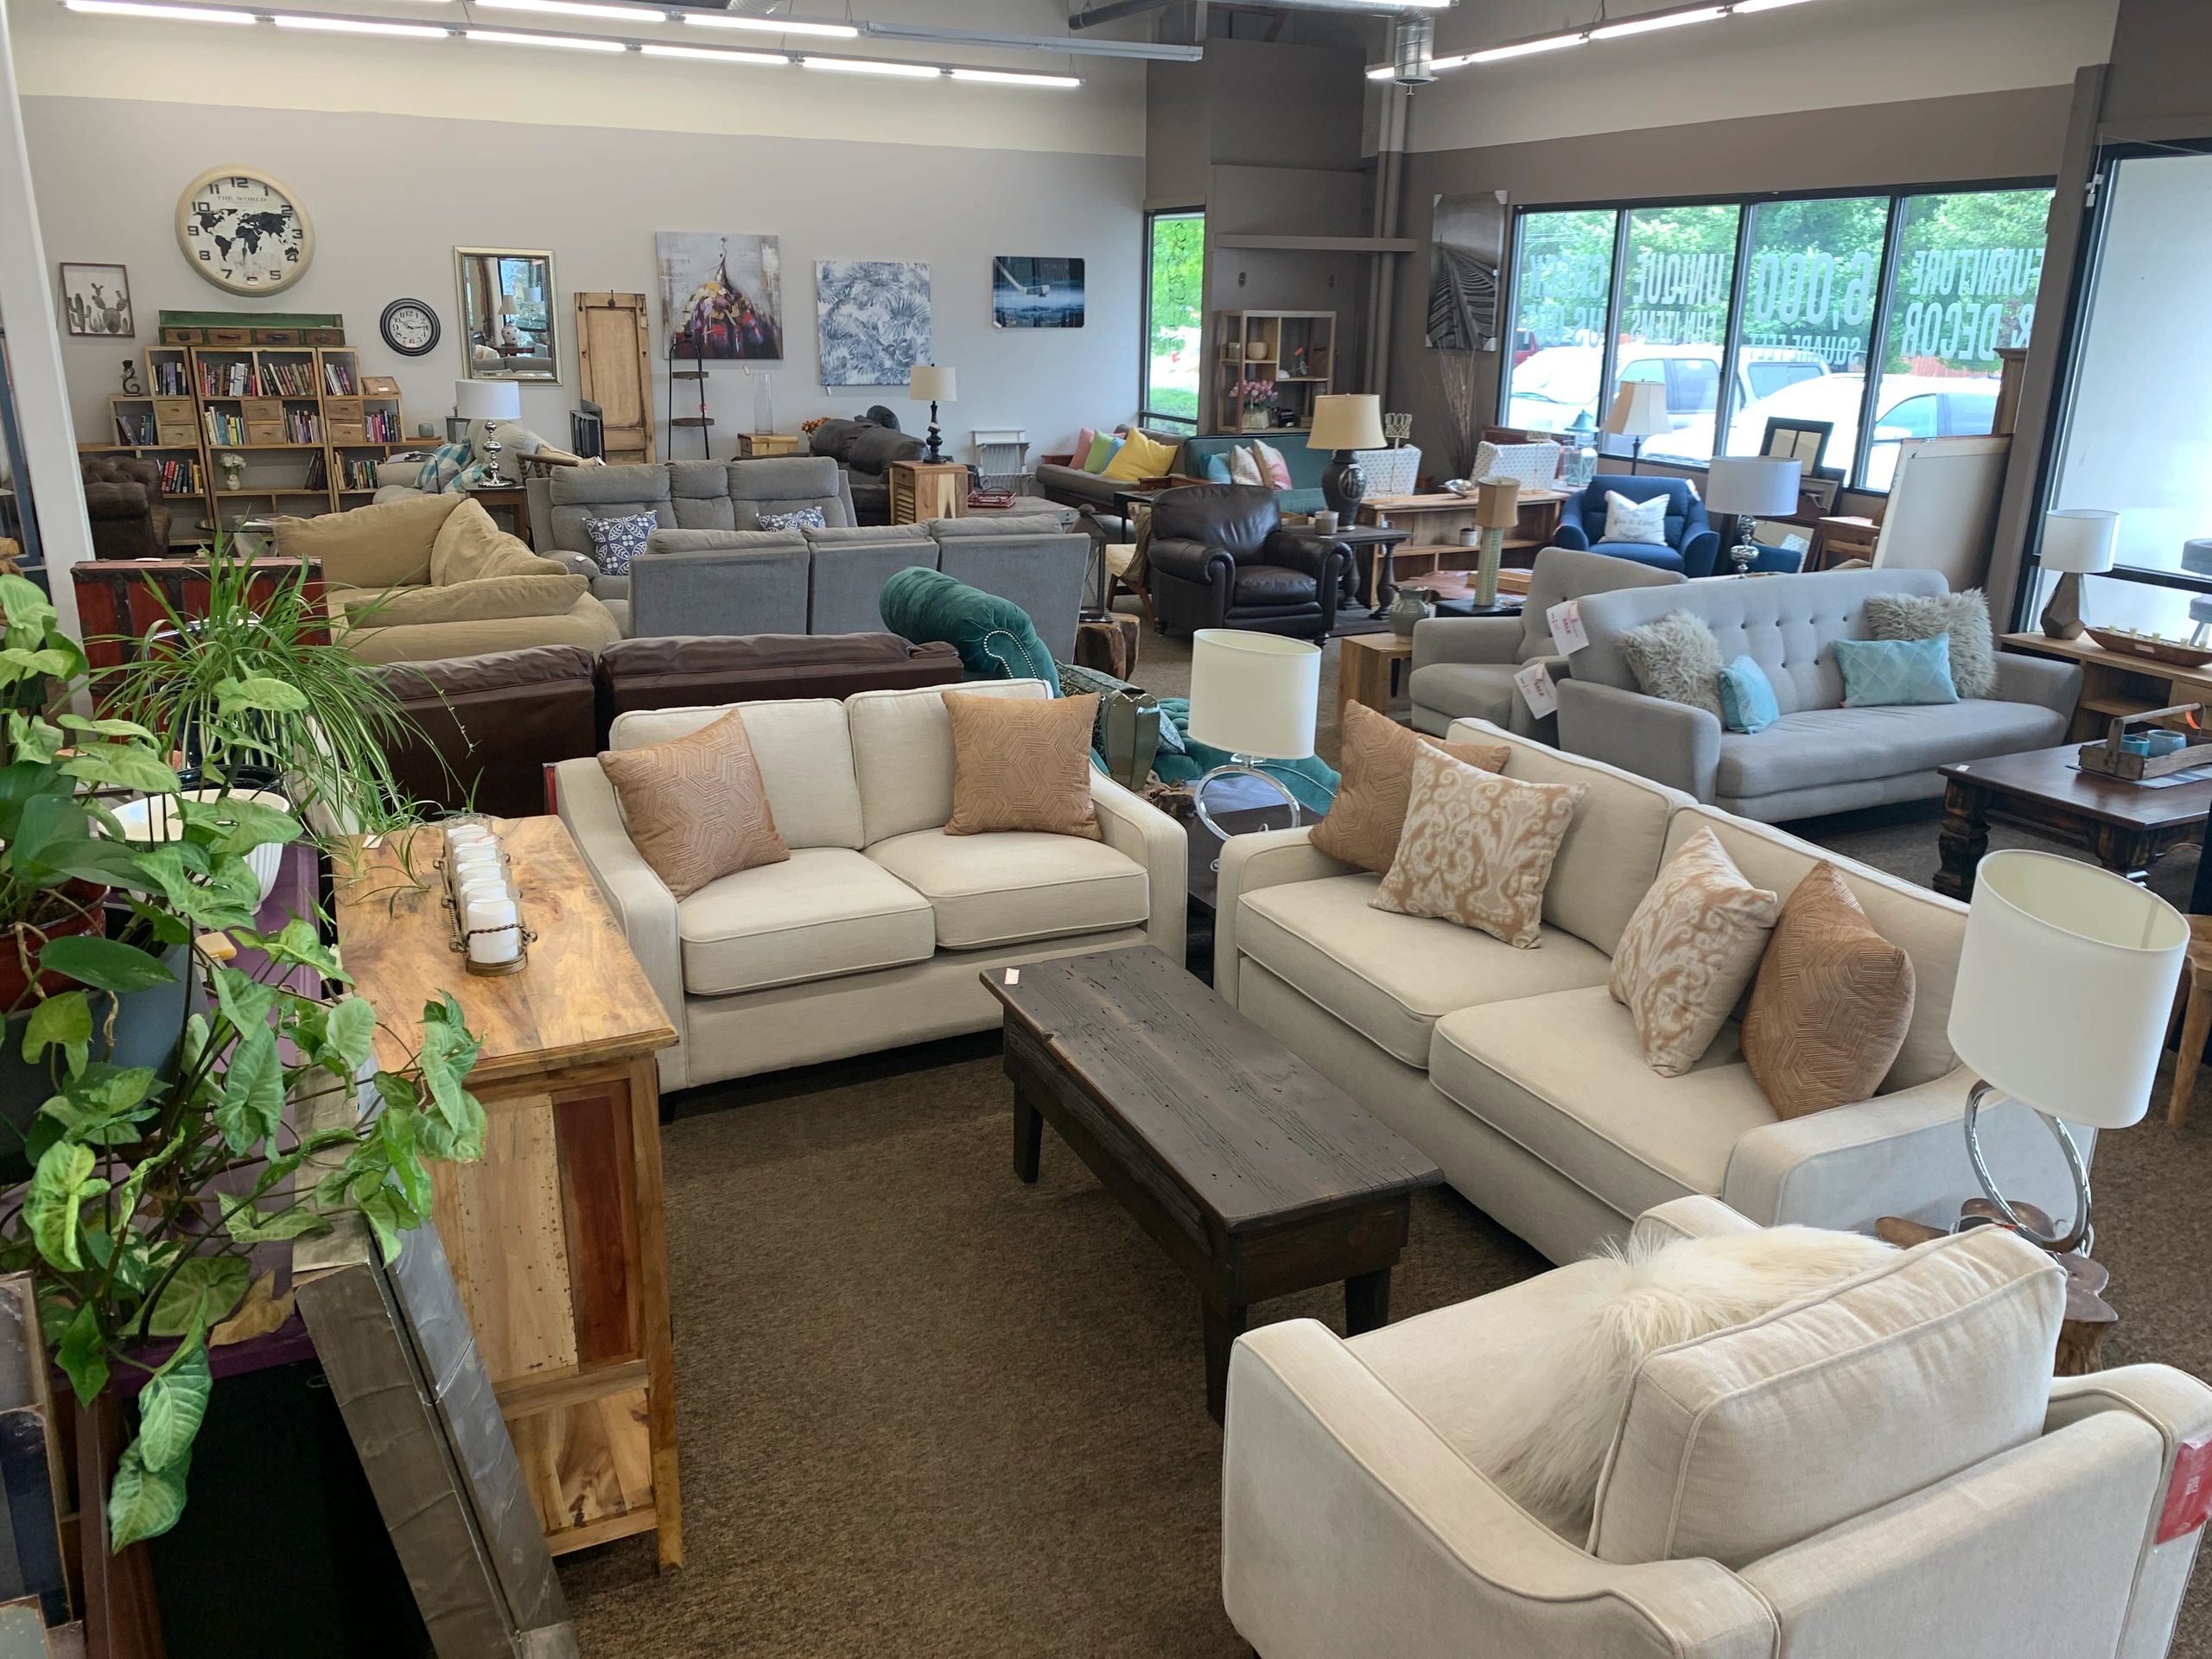 Furniture Consignment - Consignment Store